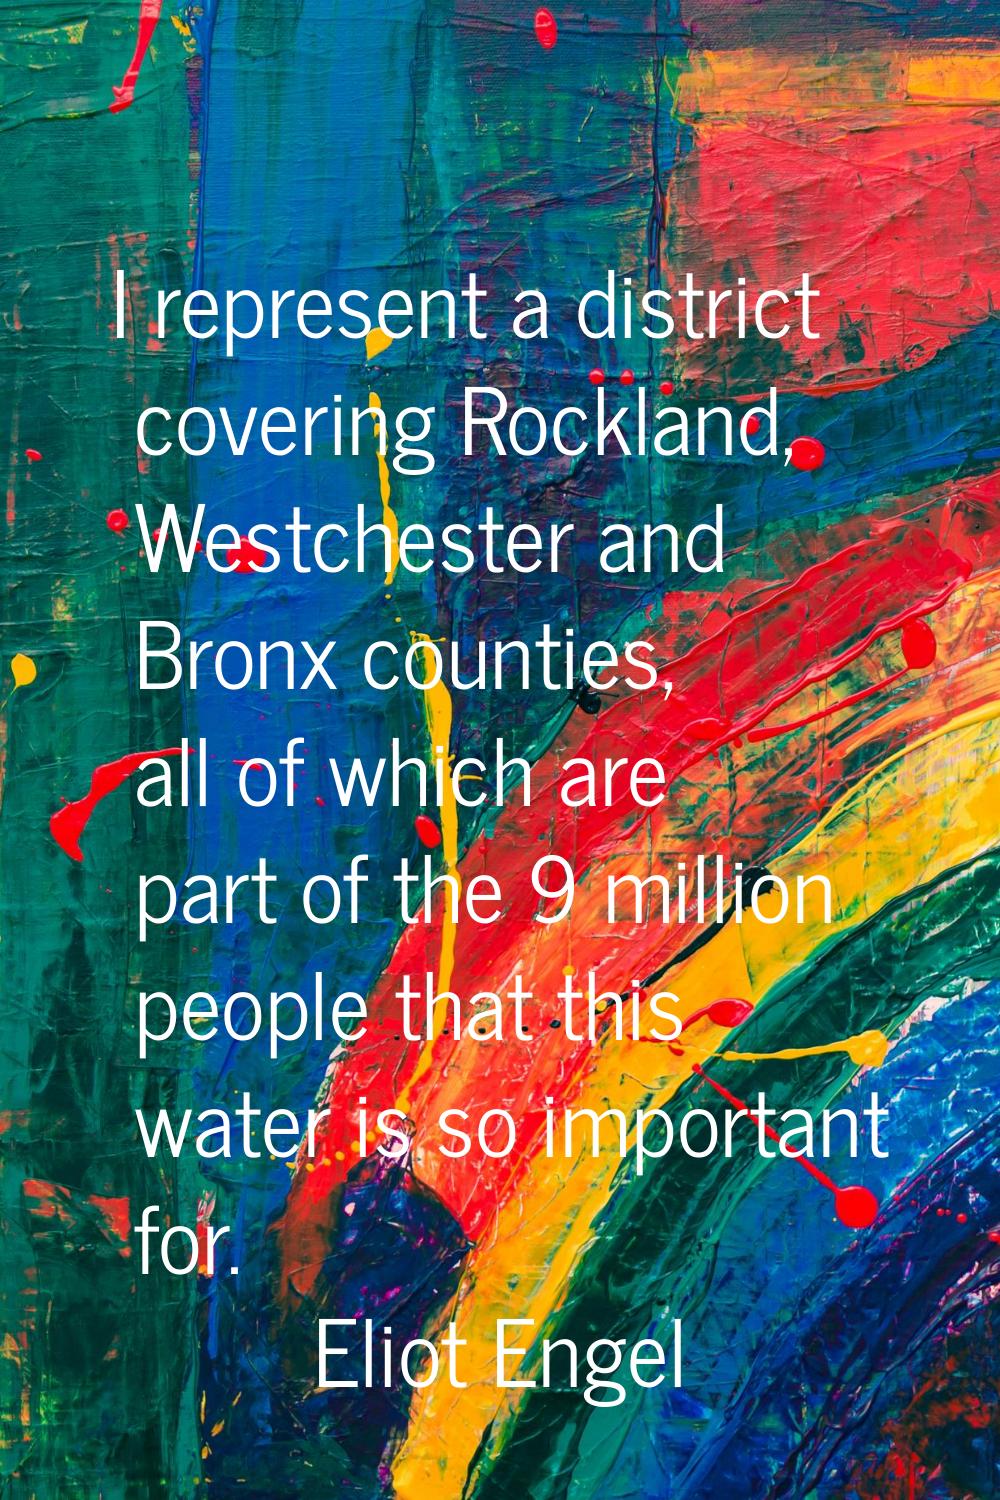 I represent a district covering Rockland, Westchester and Bronx counties, all of which are part of 